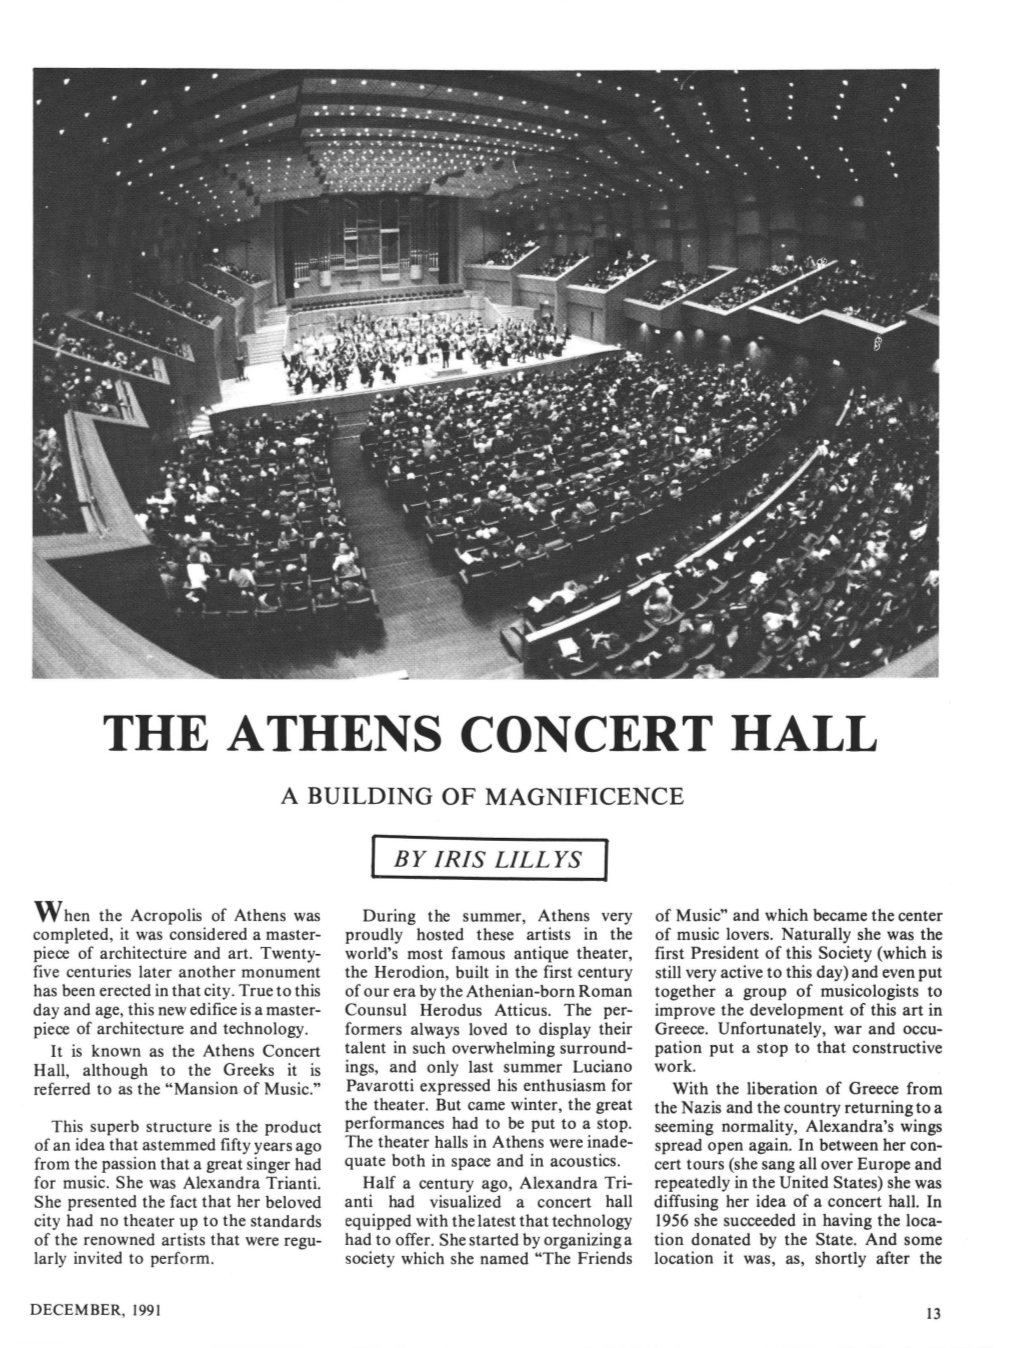 The Athens Concert Hall a Building of Magnificence